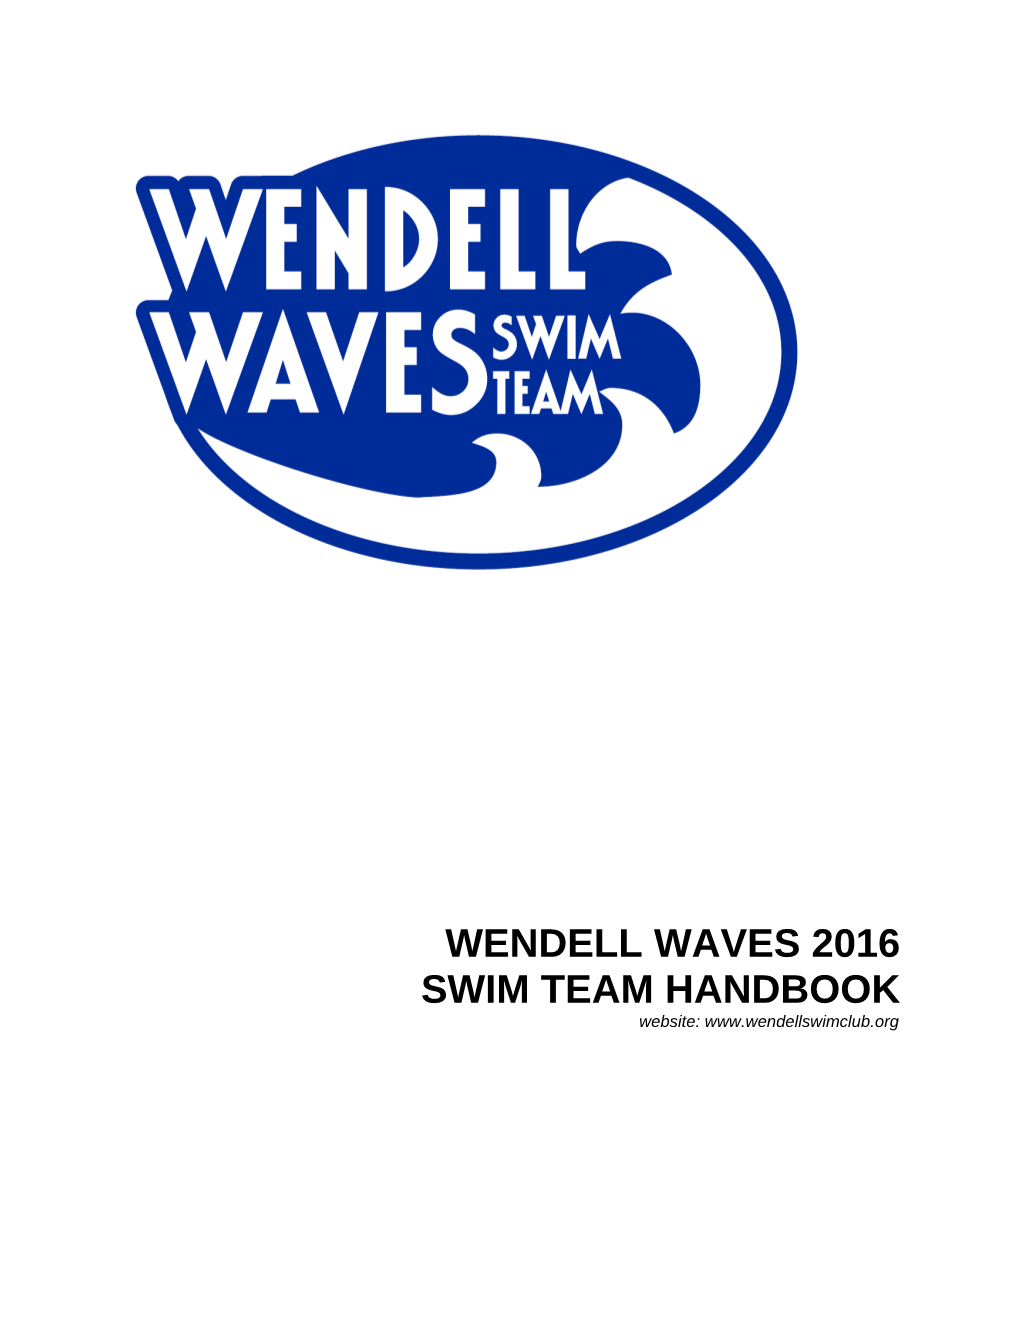 Wendell Waves 2016